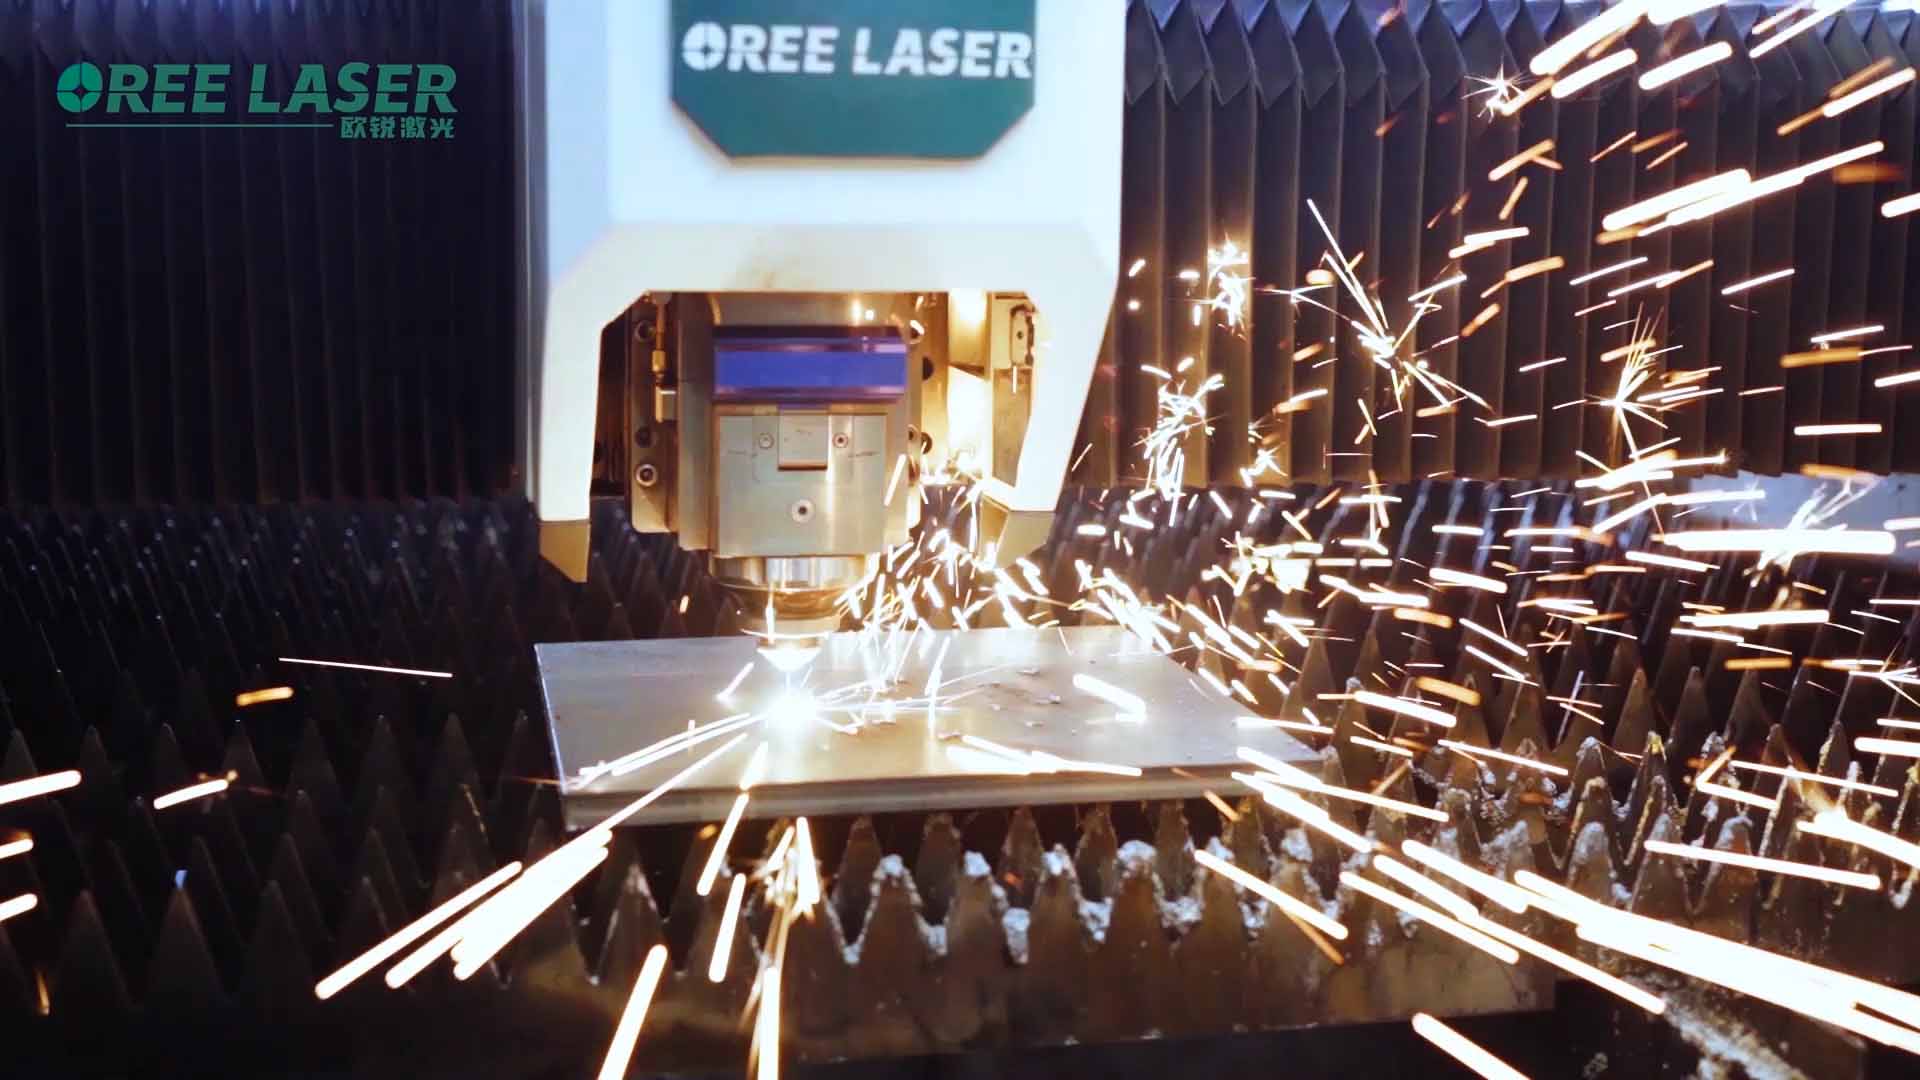 What are the advantages of laser drilling?